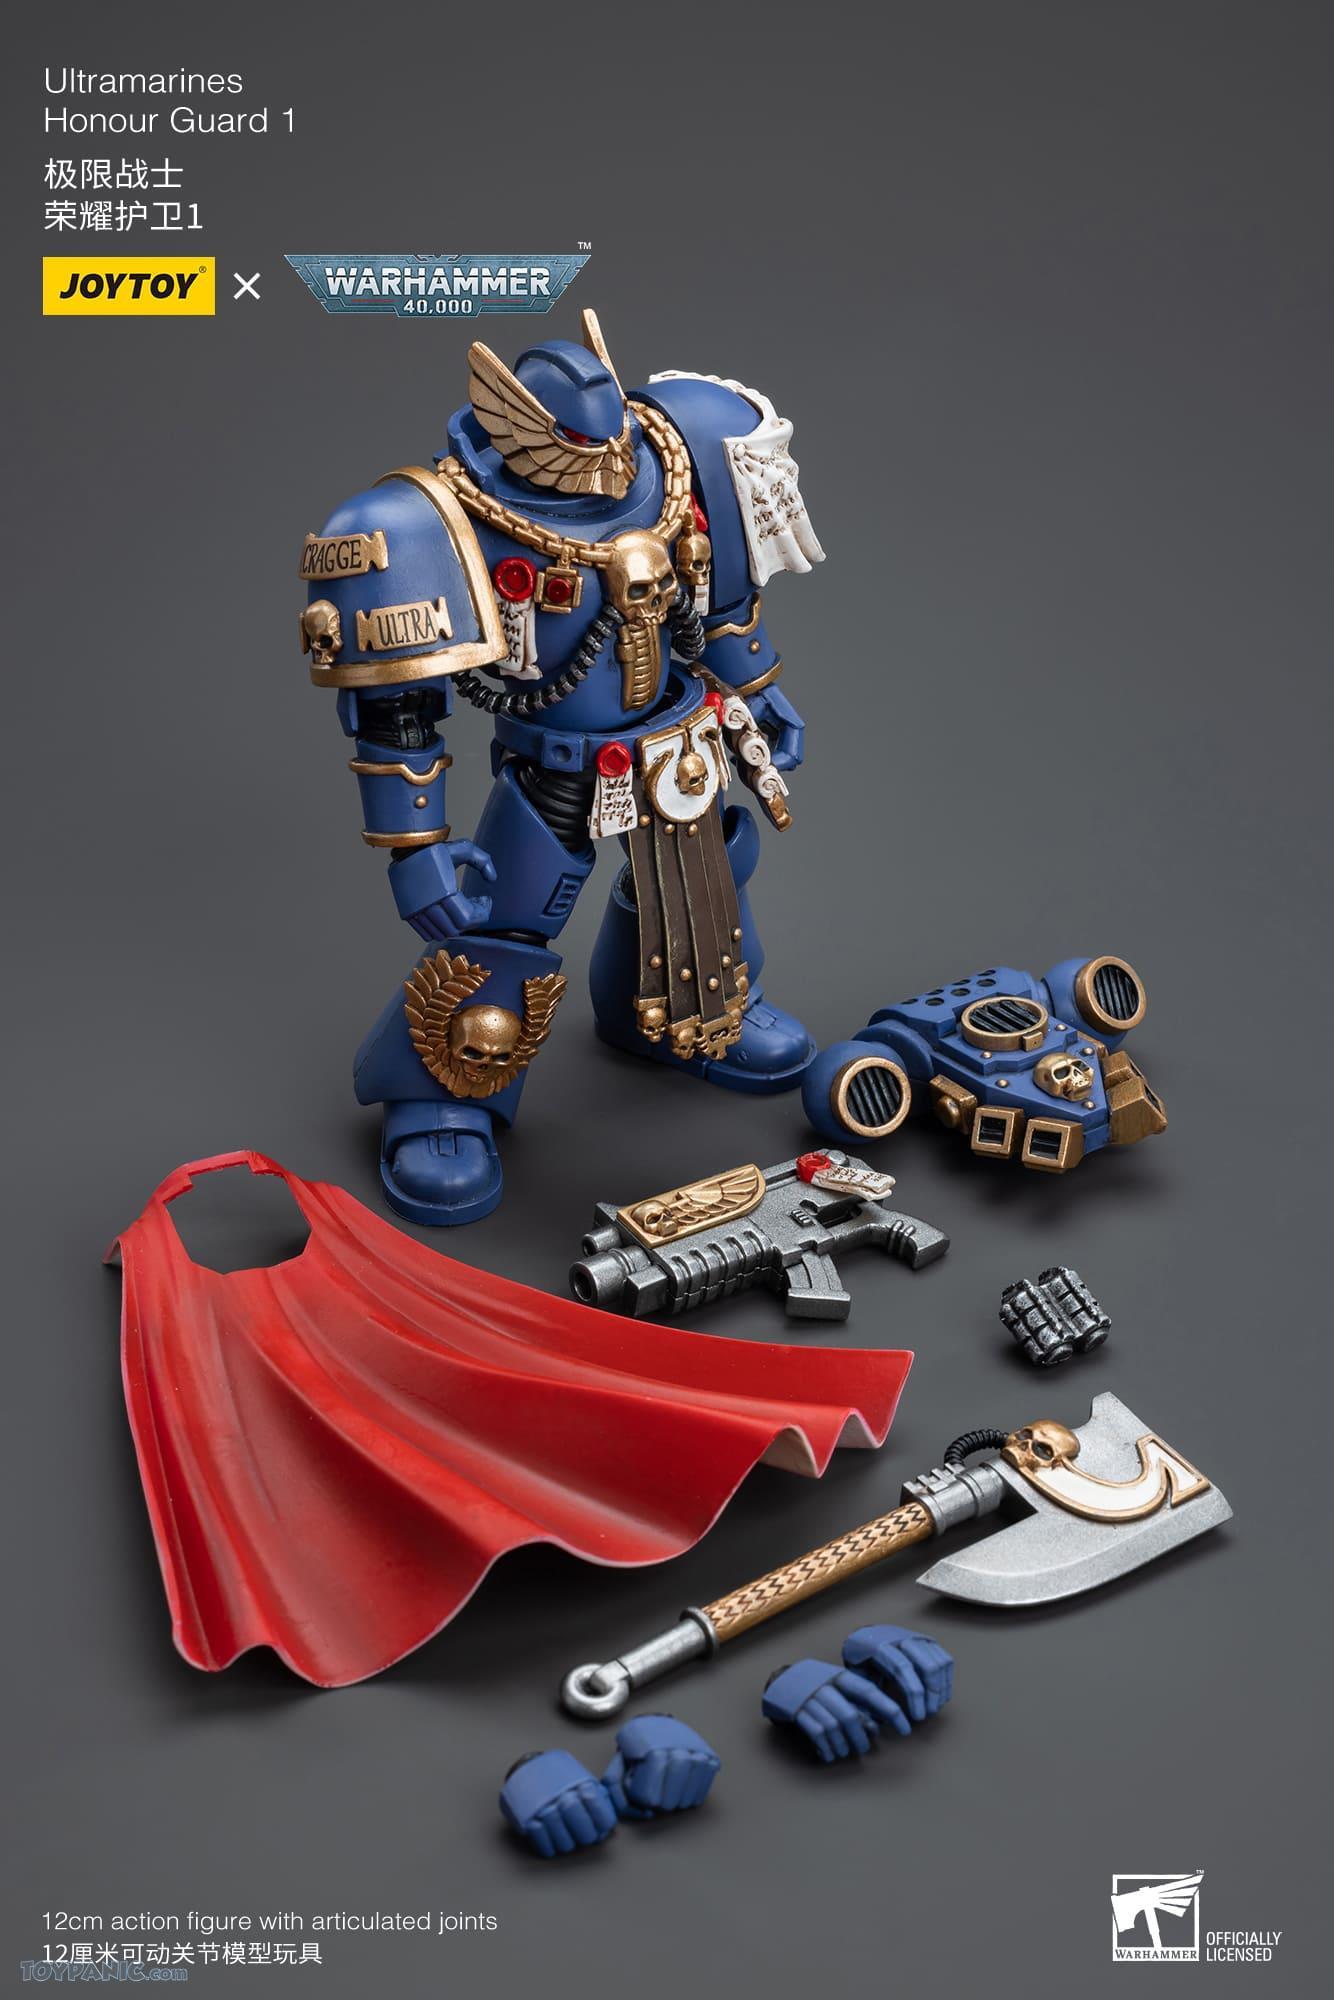 Toypanic - Malaysia's Premier Source for Hobbies, Toys, Figures, and  Collectibles